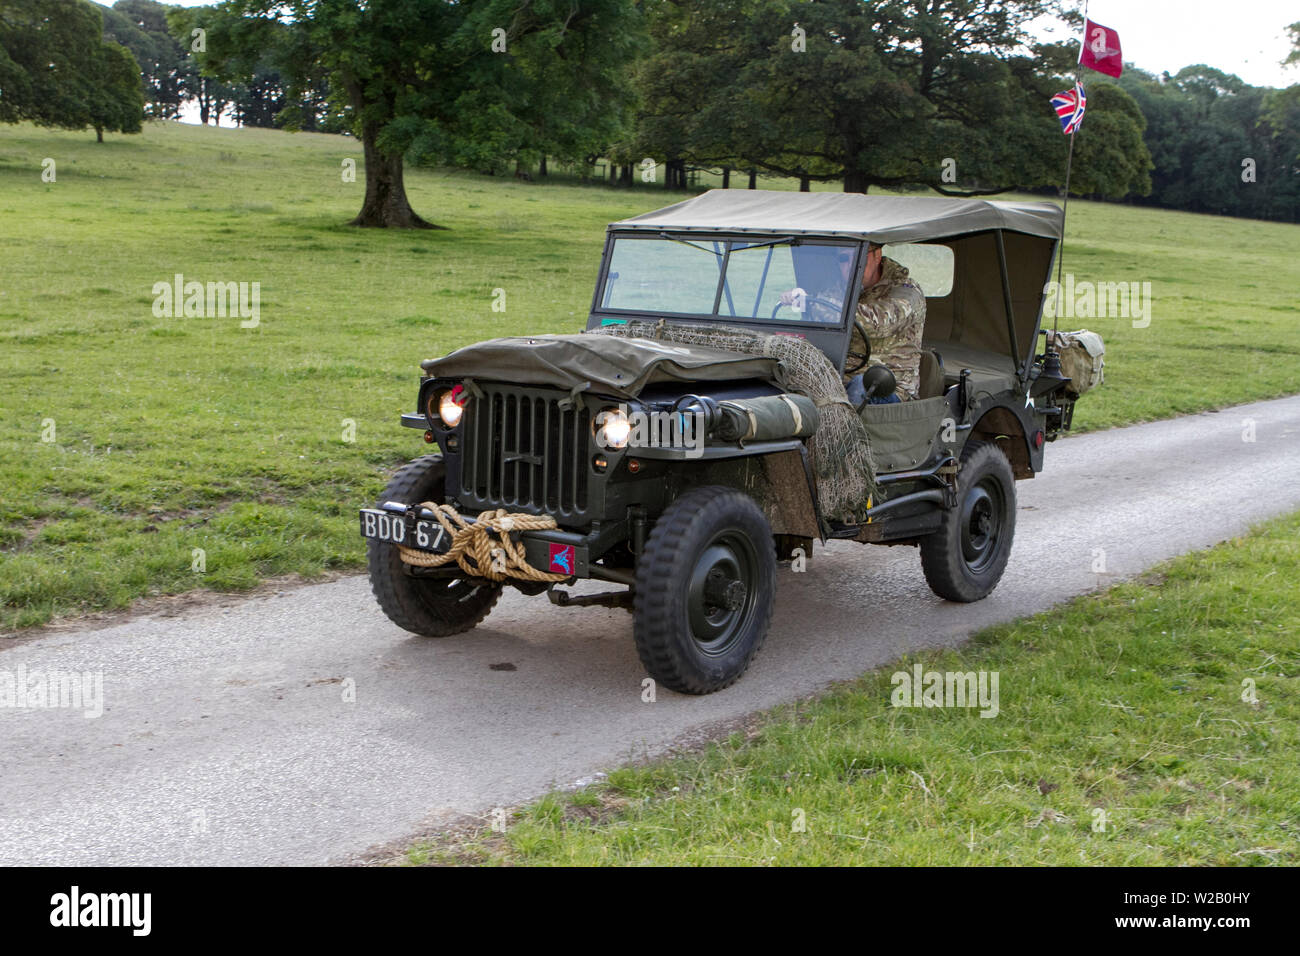 BDO67 army jeep 1947 historics, vintage motors and collectibles 2019; Leighton Hall transport collection of cars & veteran vehicles of yesteryear. Stock Photo